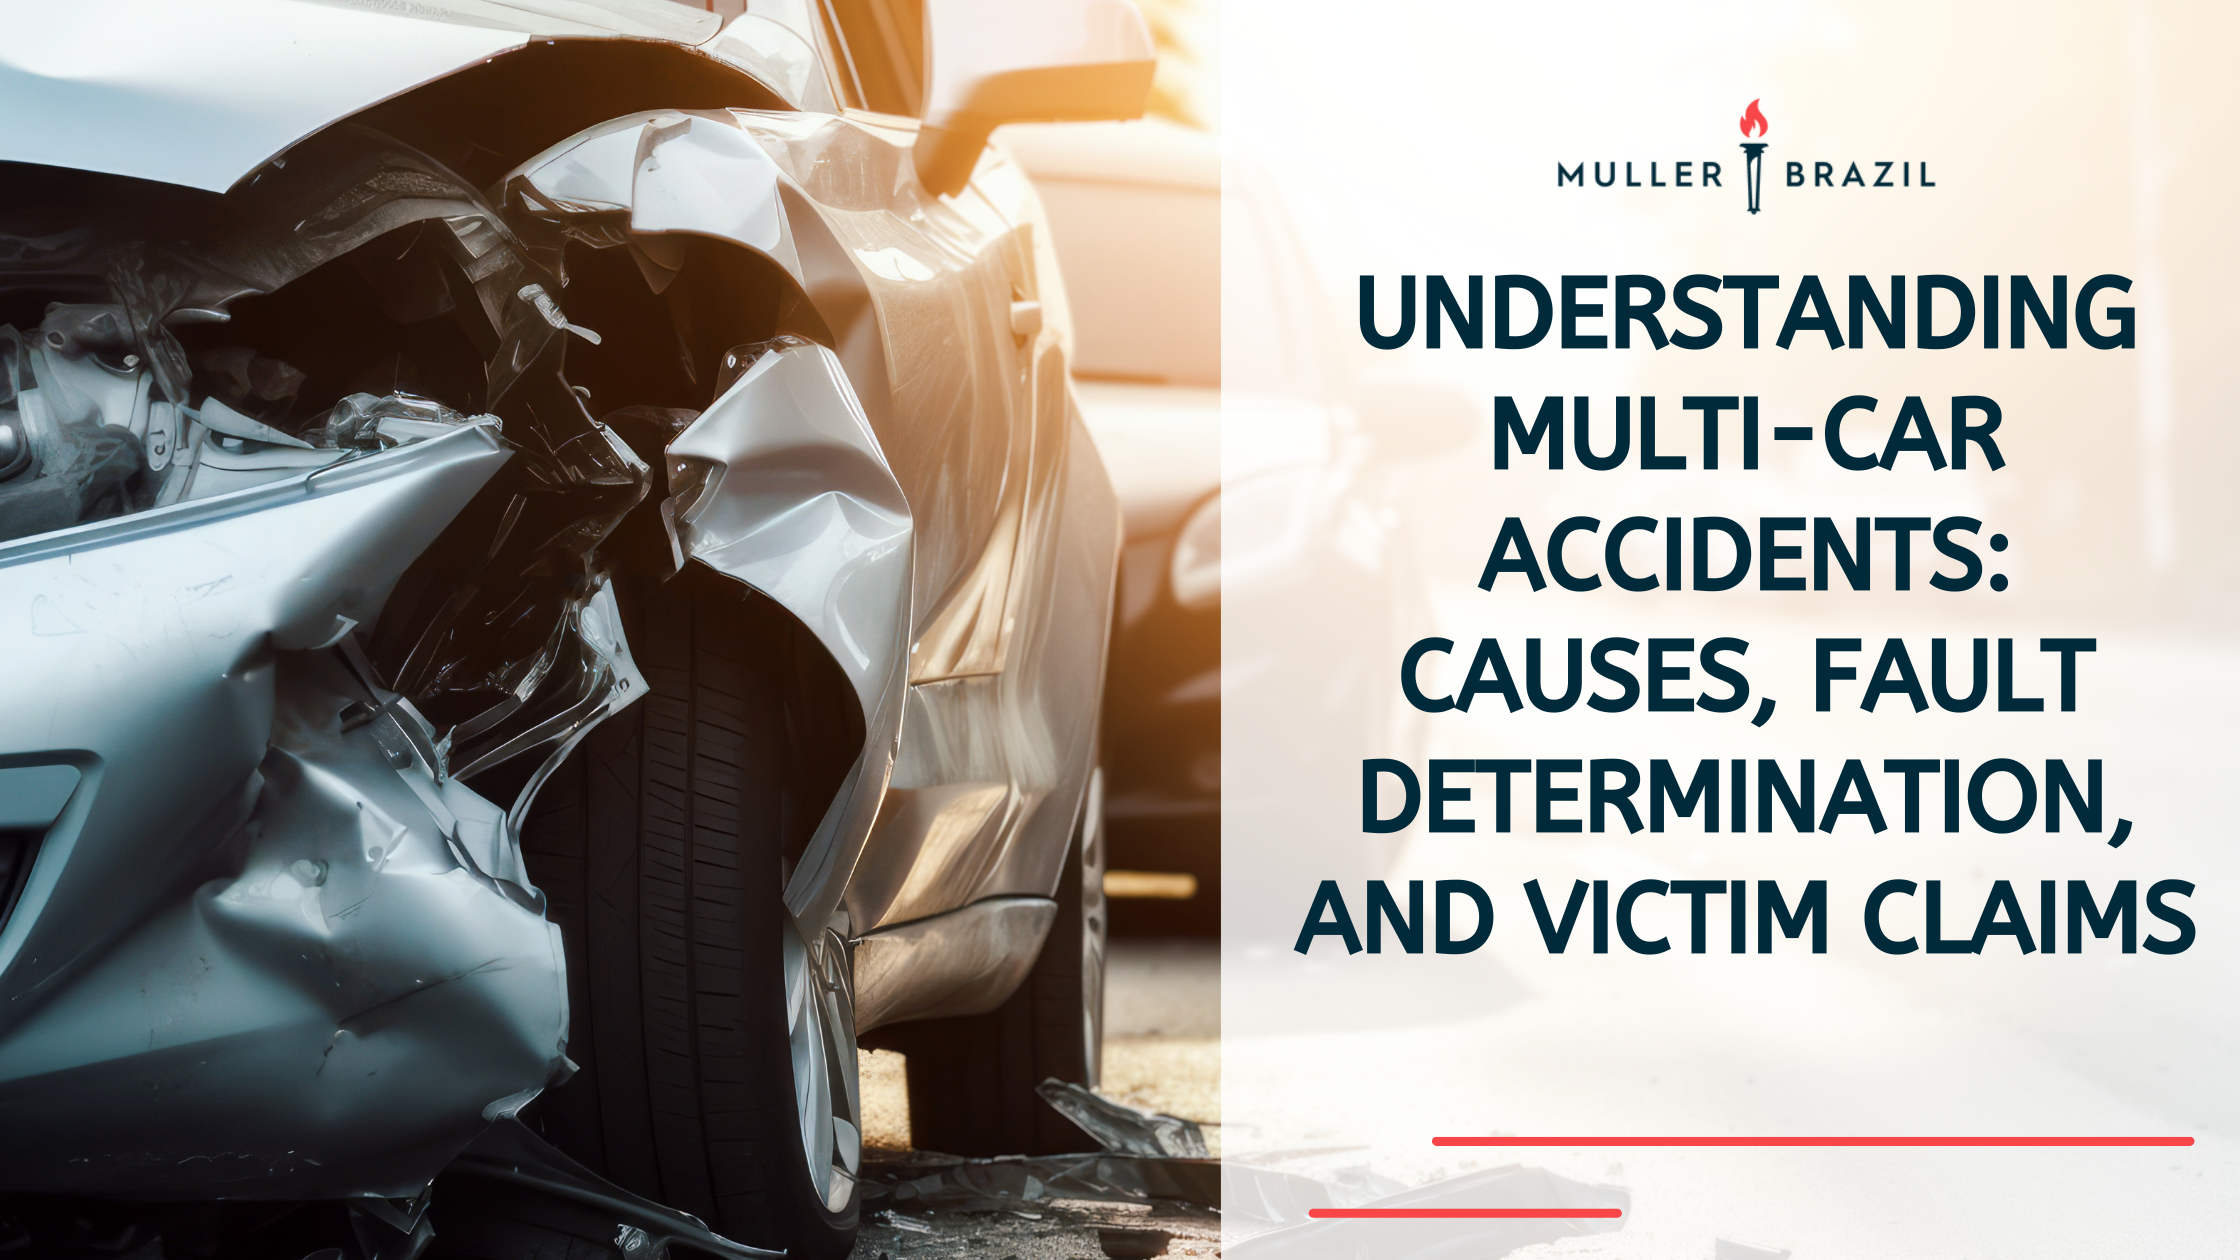 Understanding Multi-Car Accidents: Causes, Fault Determination, and Victim Claims